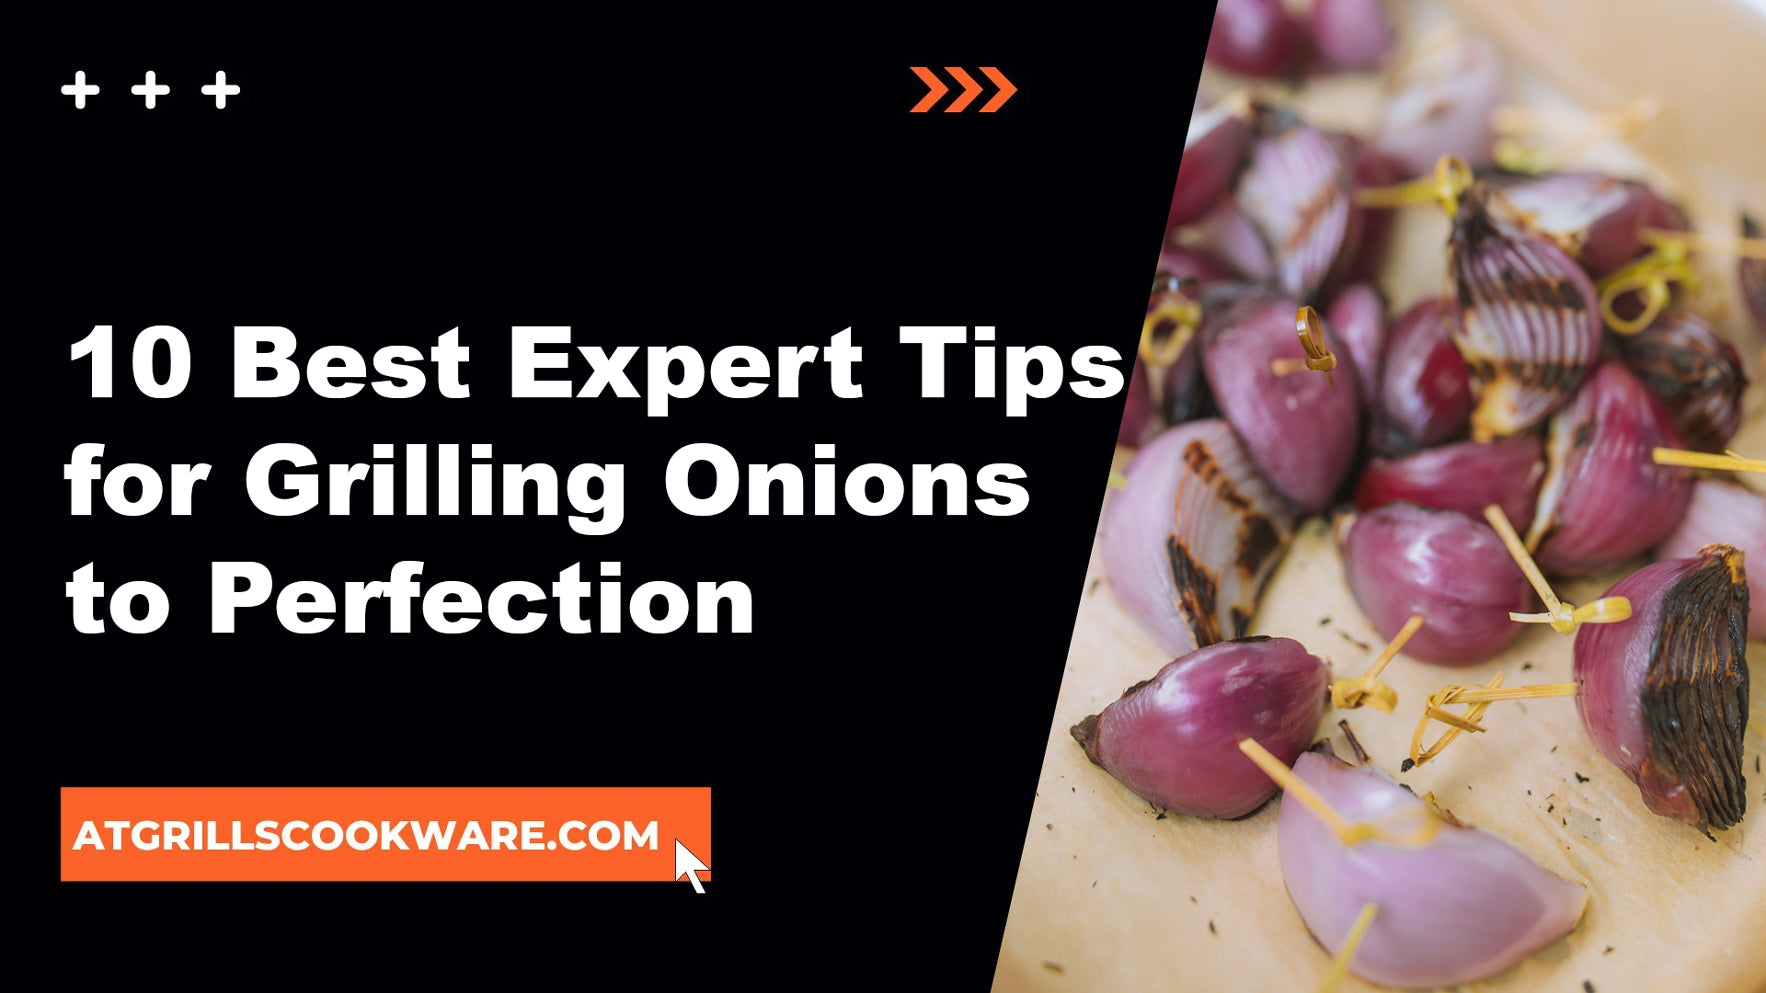 10 Best Expert Tips for Grilling Onions to Perfection